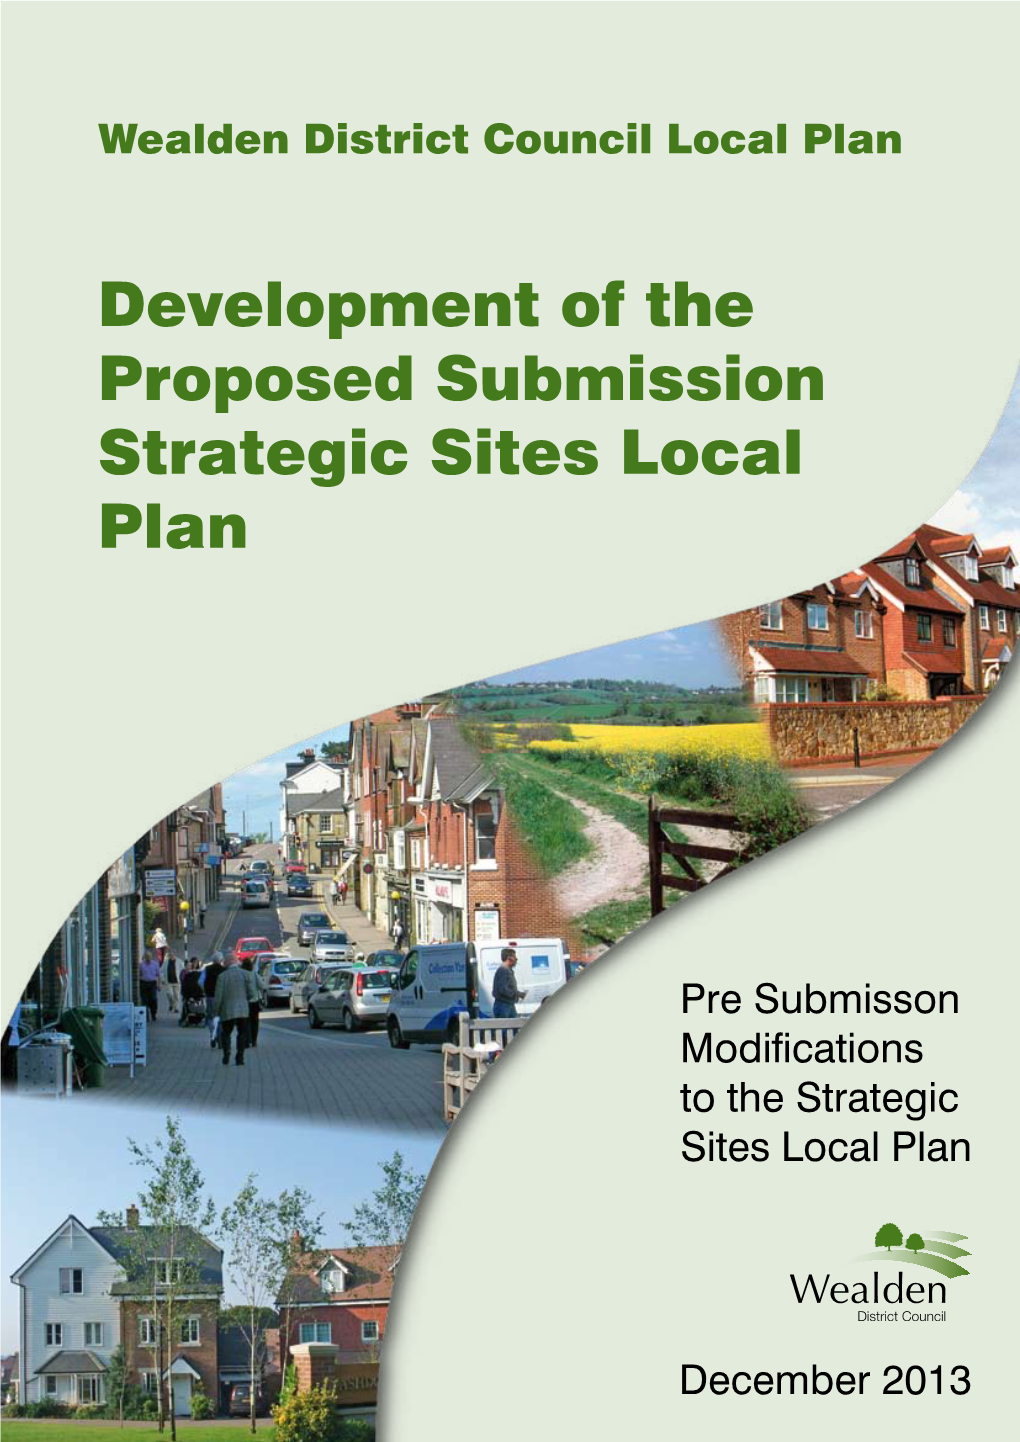 Development of the Proposed Submission Strategic Sites Local Plan